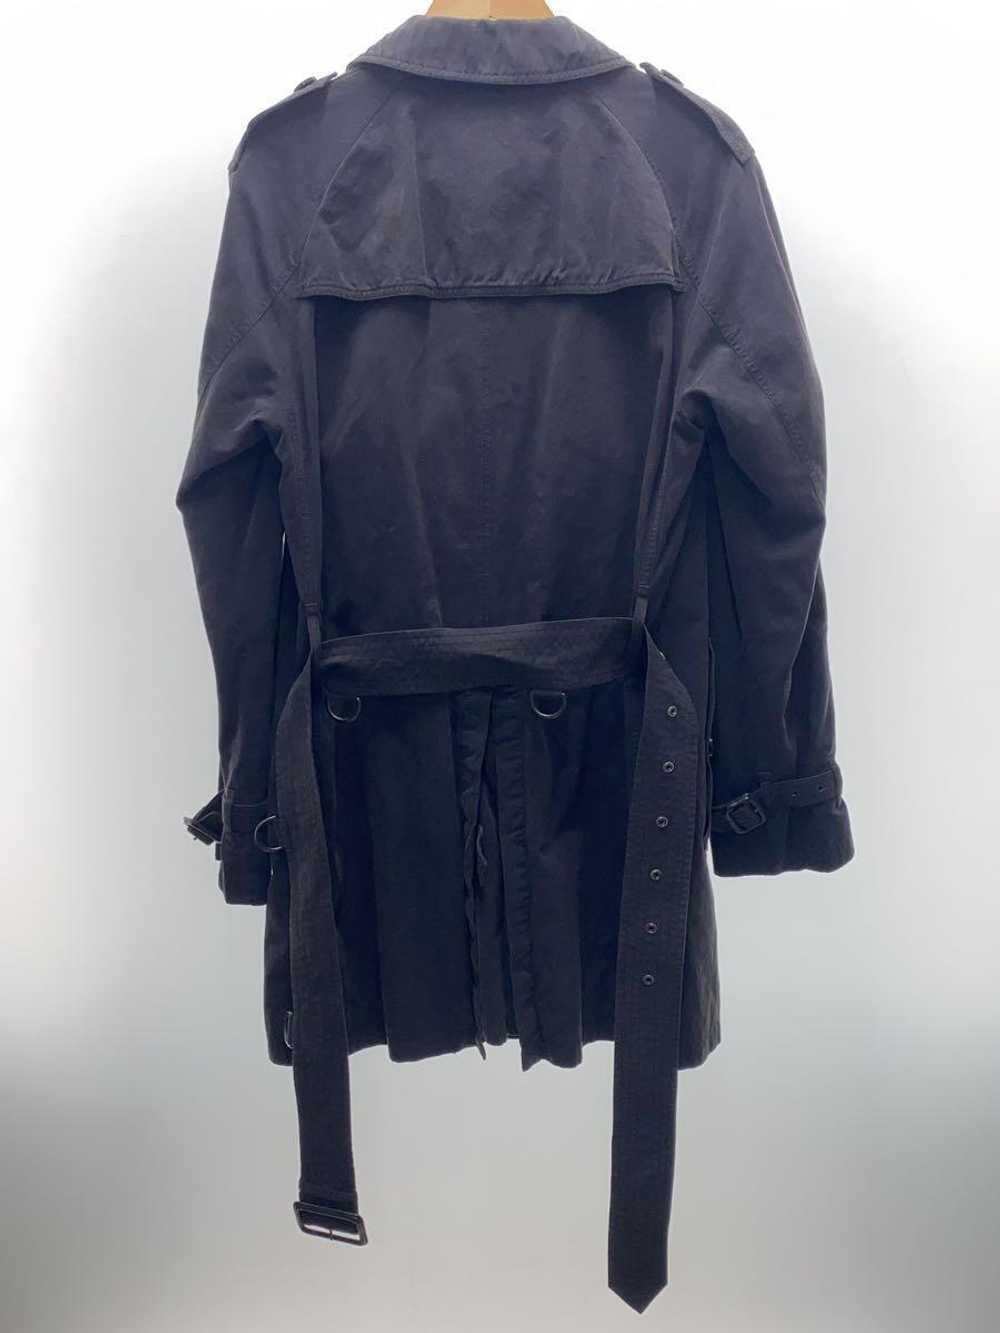 Burberry London Trench Coat/42/Cotton////Wear - image 2